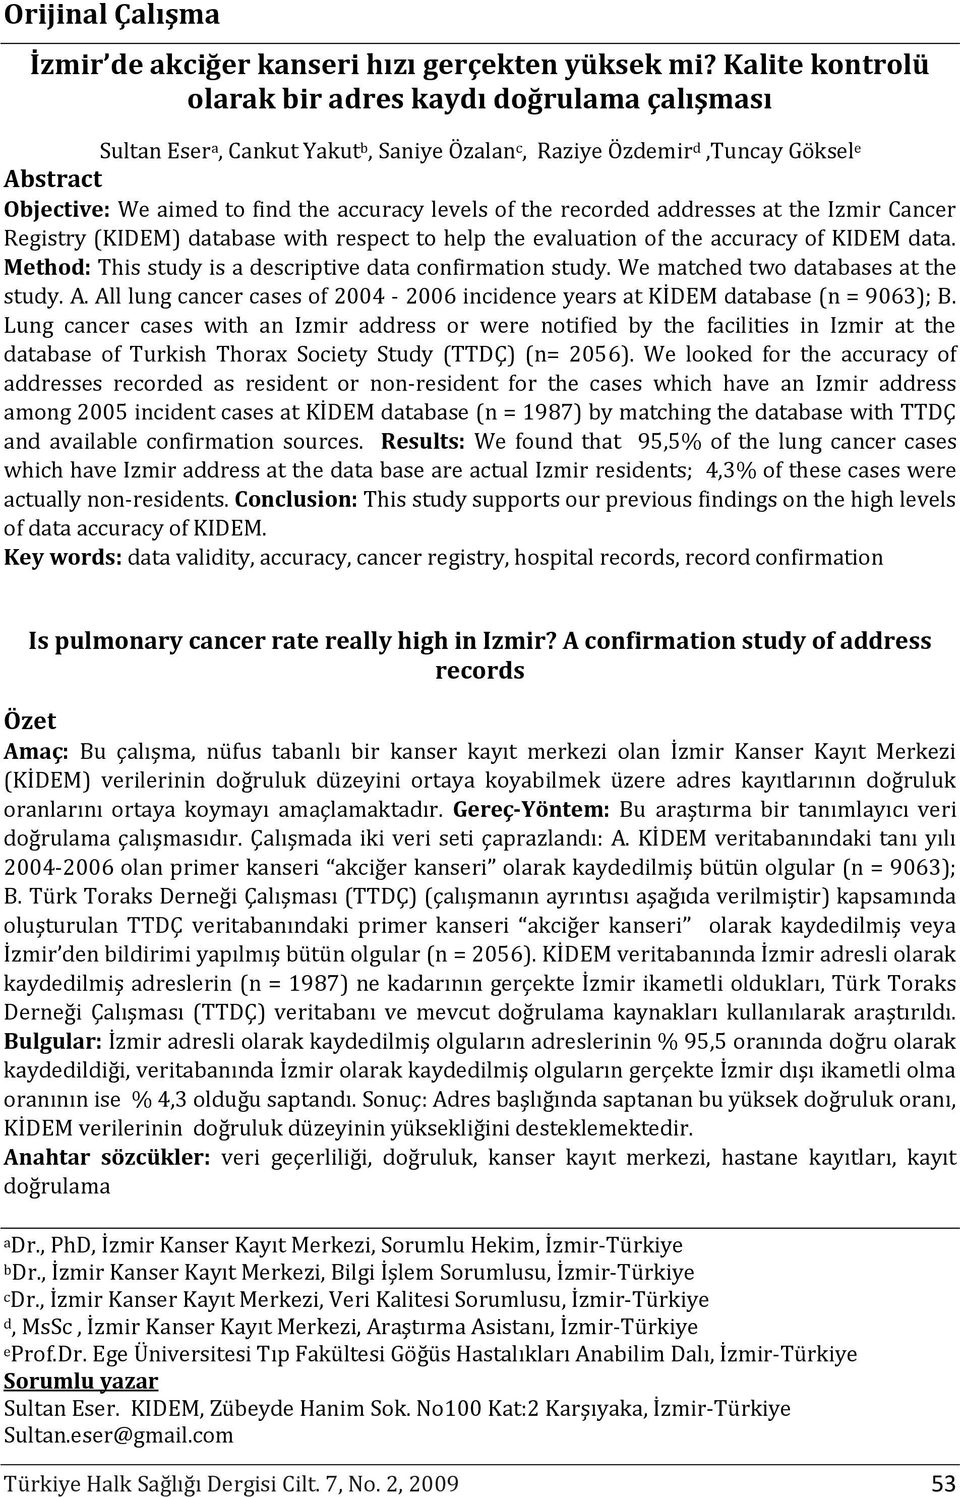 the recorded addresses at the Izmir Cancer Registry (KIDEM) database with respect to help the evaluation of the accuracy of KIDEM data. Method: This study is a descriptive data confirmation study.